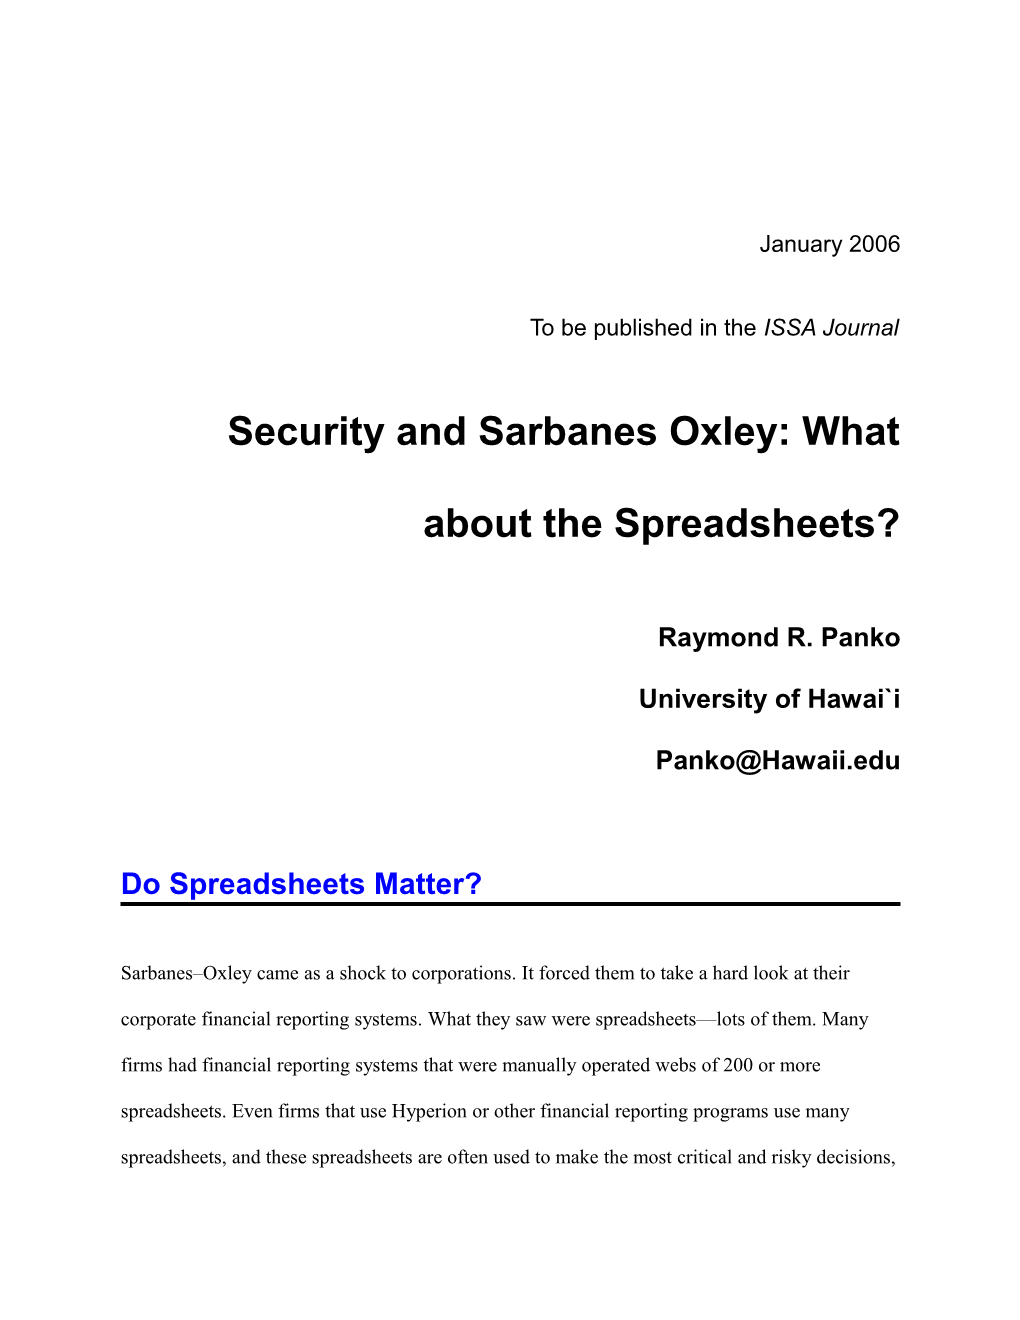 Security and Sarbanes Oxley: What About the Spreadsheets?